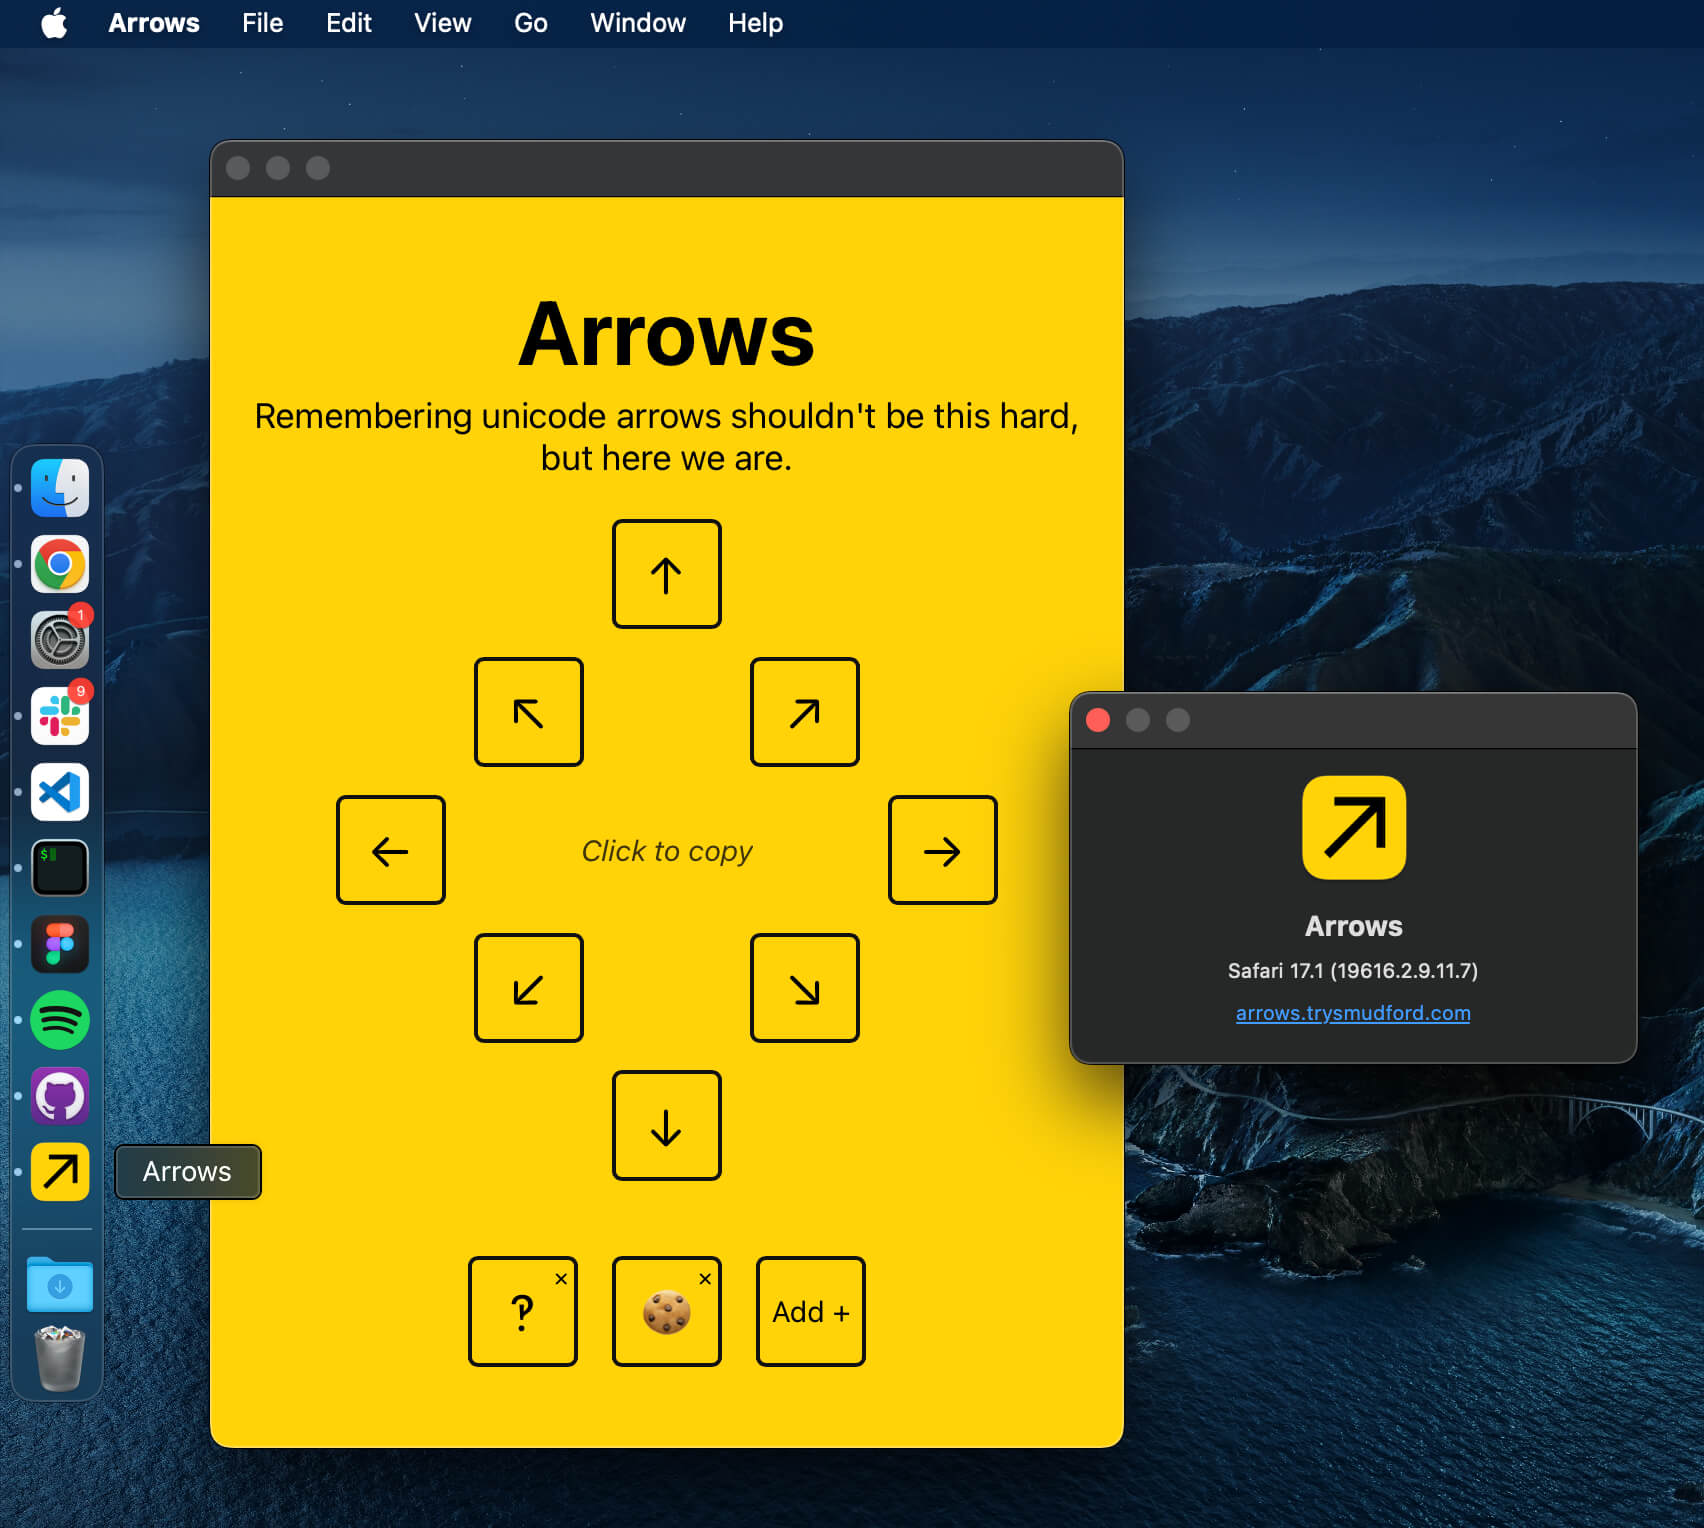 A screenshot of the ‘arrows’ application on the desktop, complete with standalone UI, custom dock icon & name, and ‘about’ page.